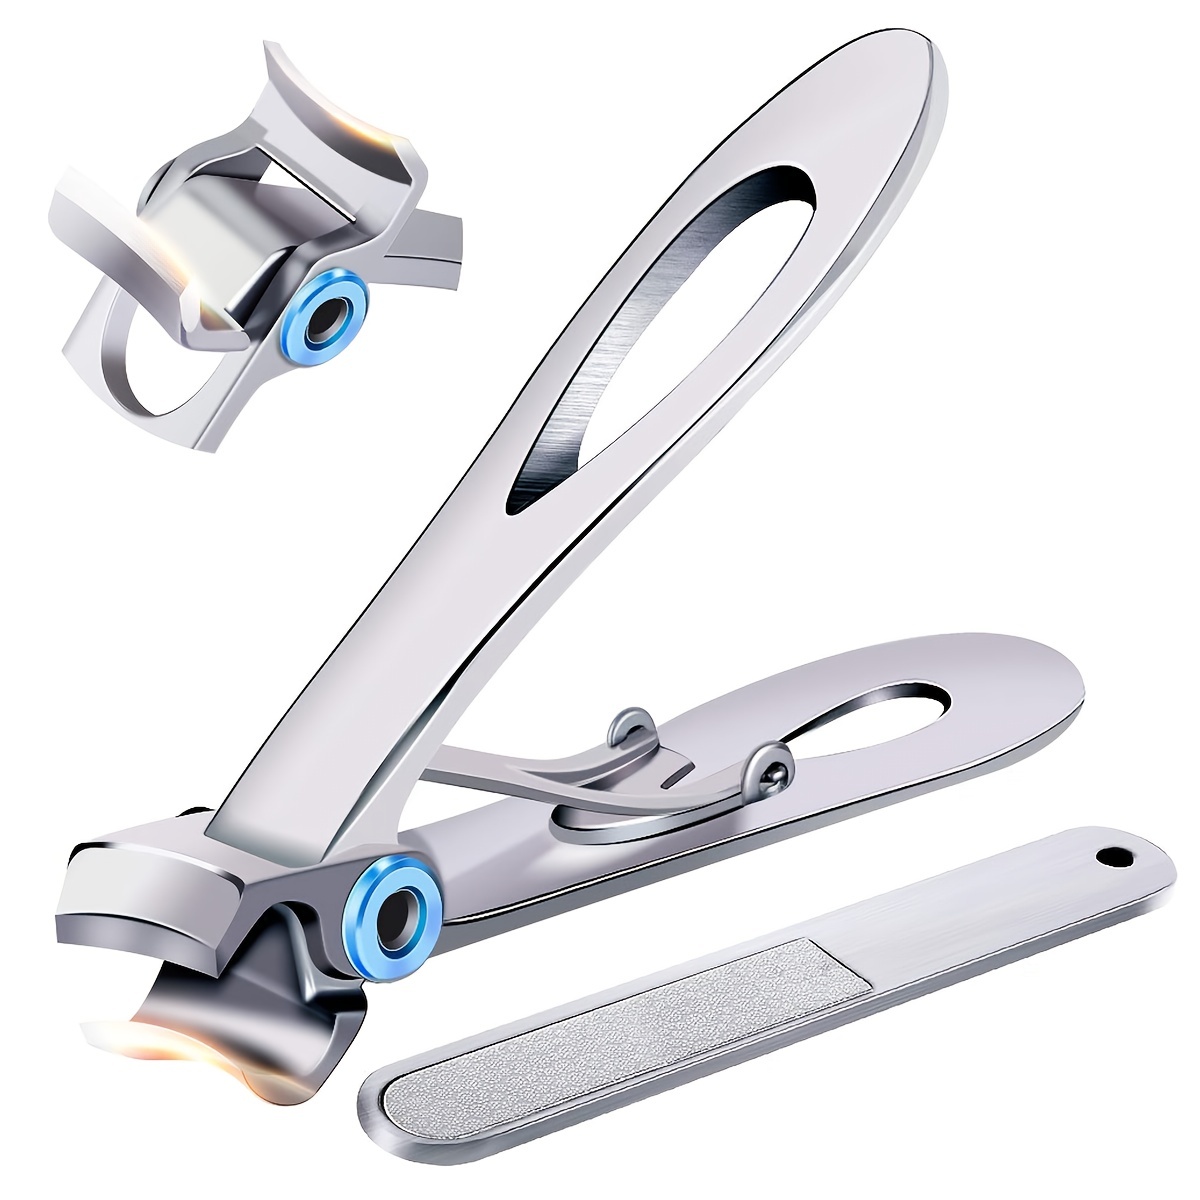  Healthy Seniors Complete Nail and Toenail Clippers